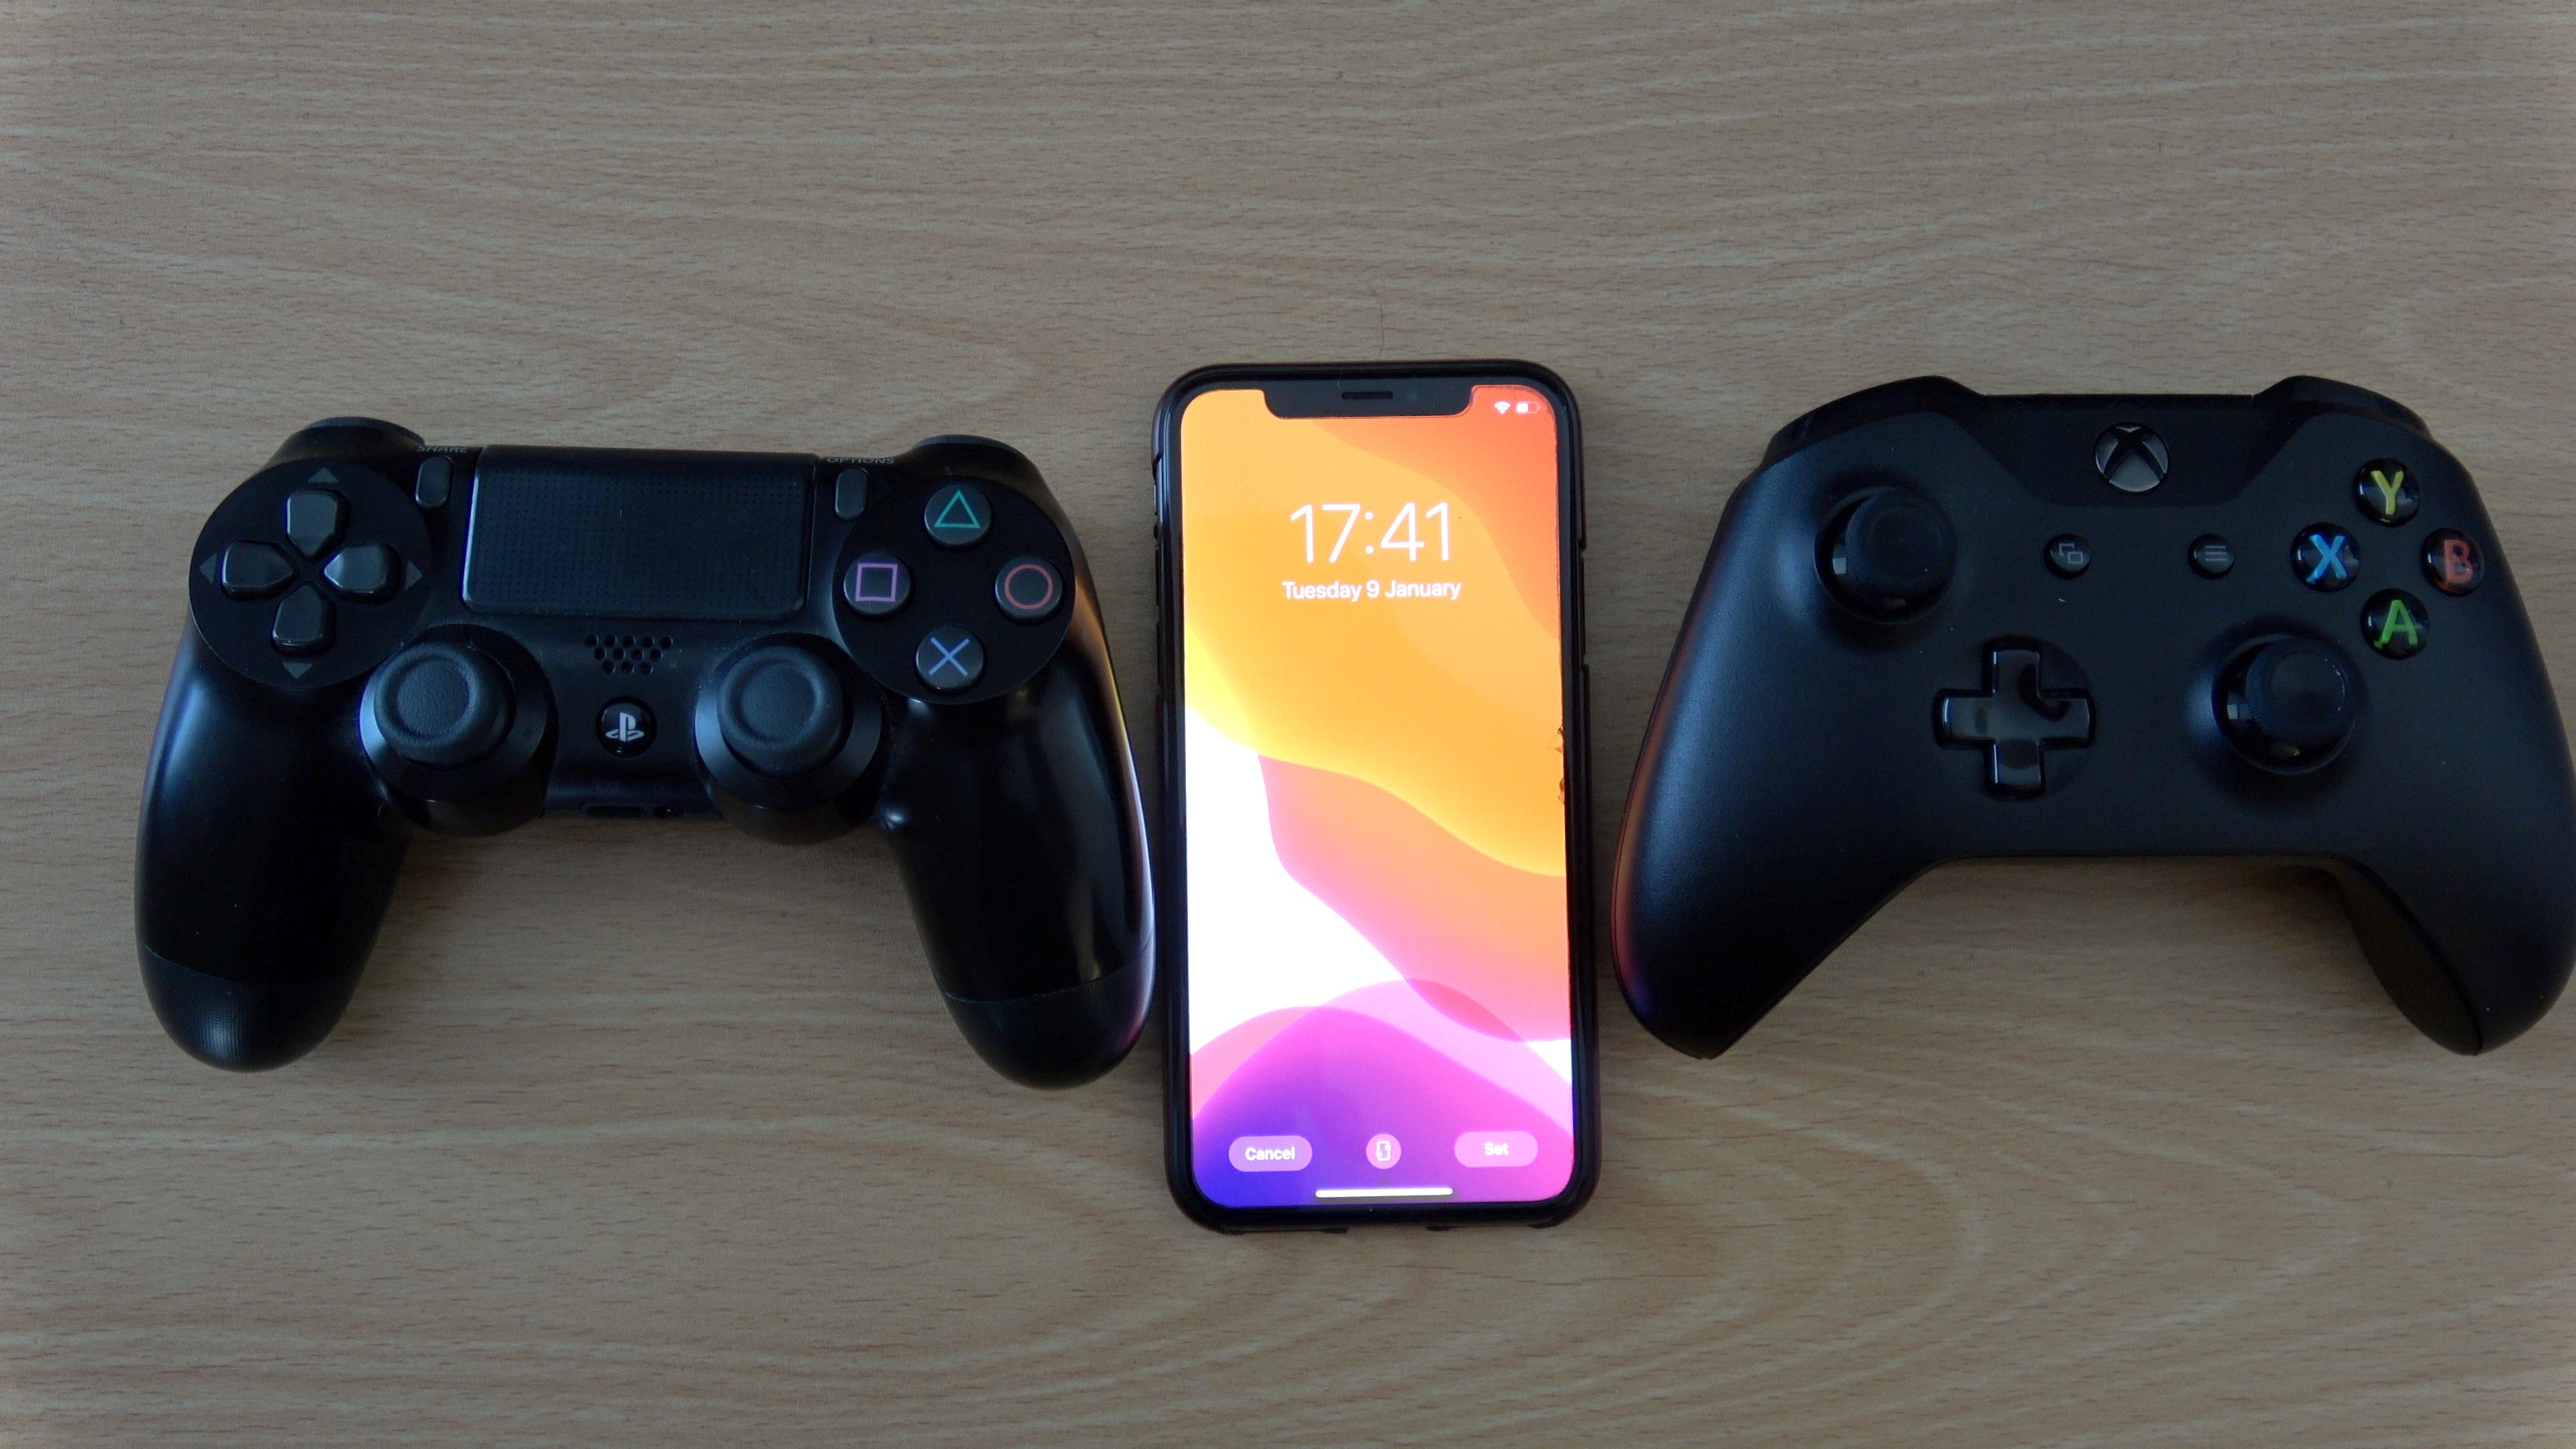 How to use a PS4 DualShock 4 and Xbox One controller with iPhone & iPad —  No hacking required! | by Venom | Medium